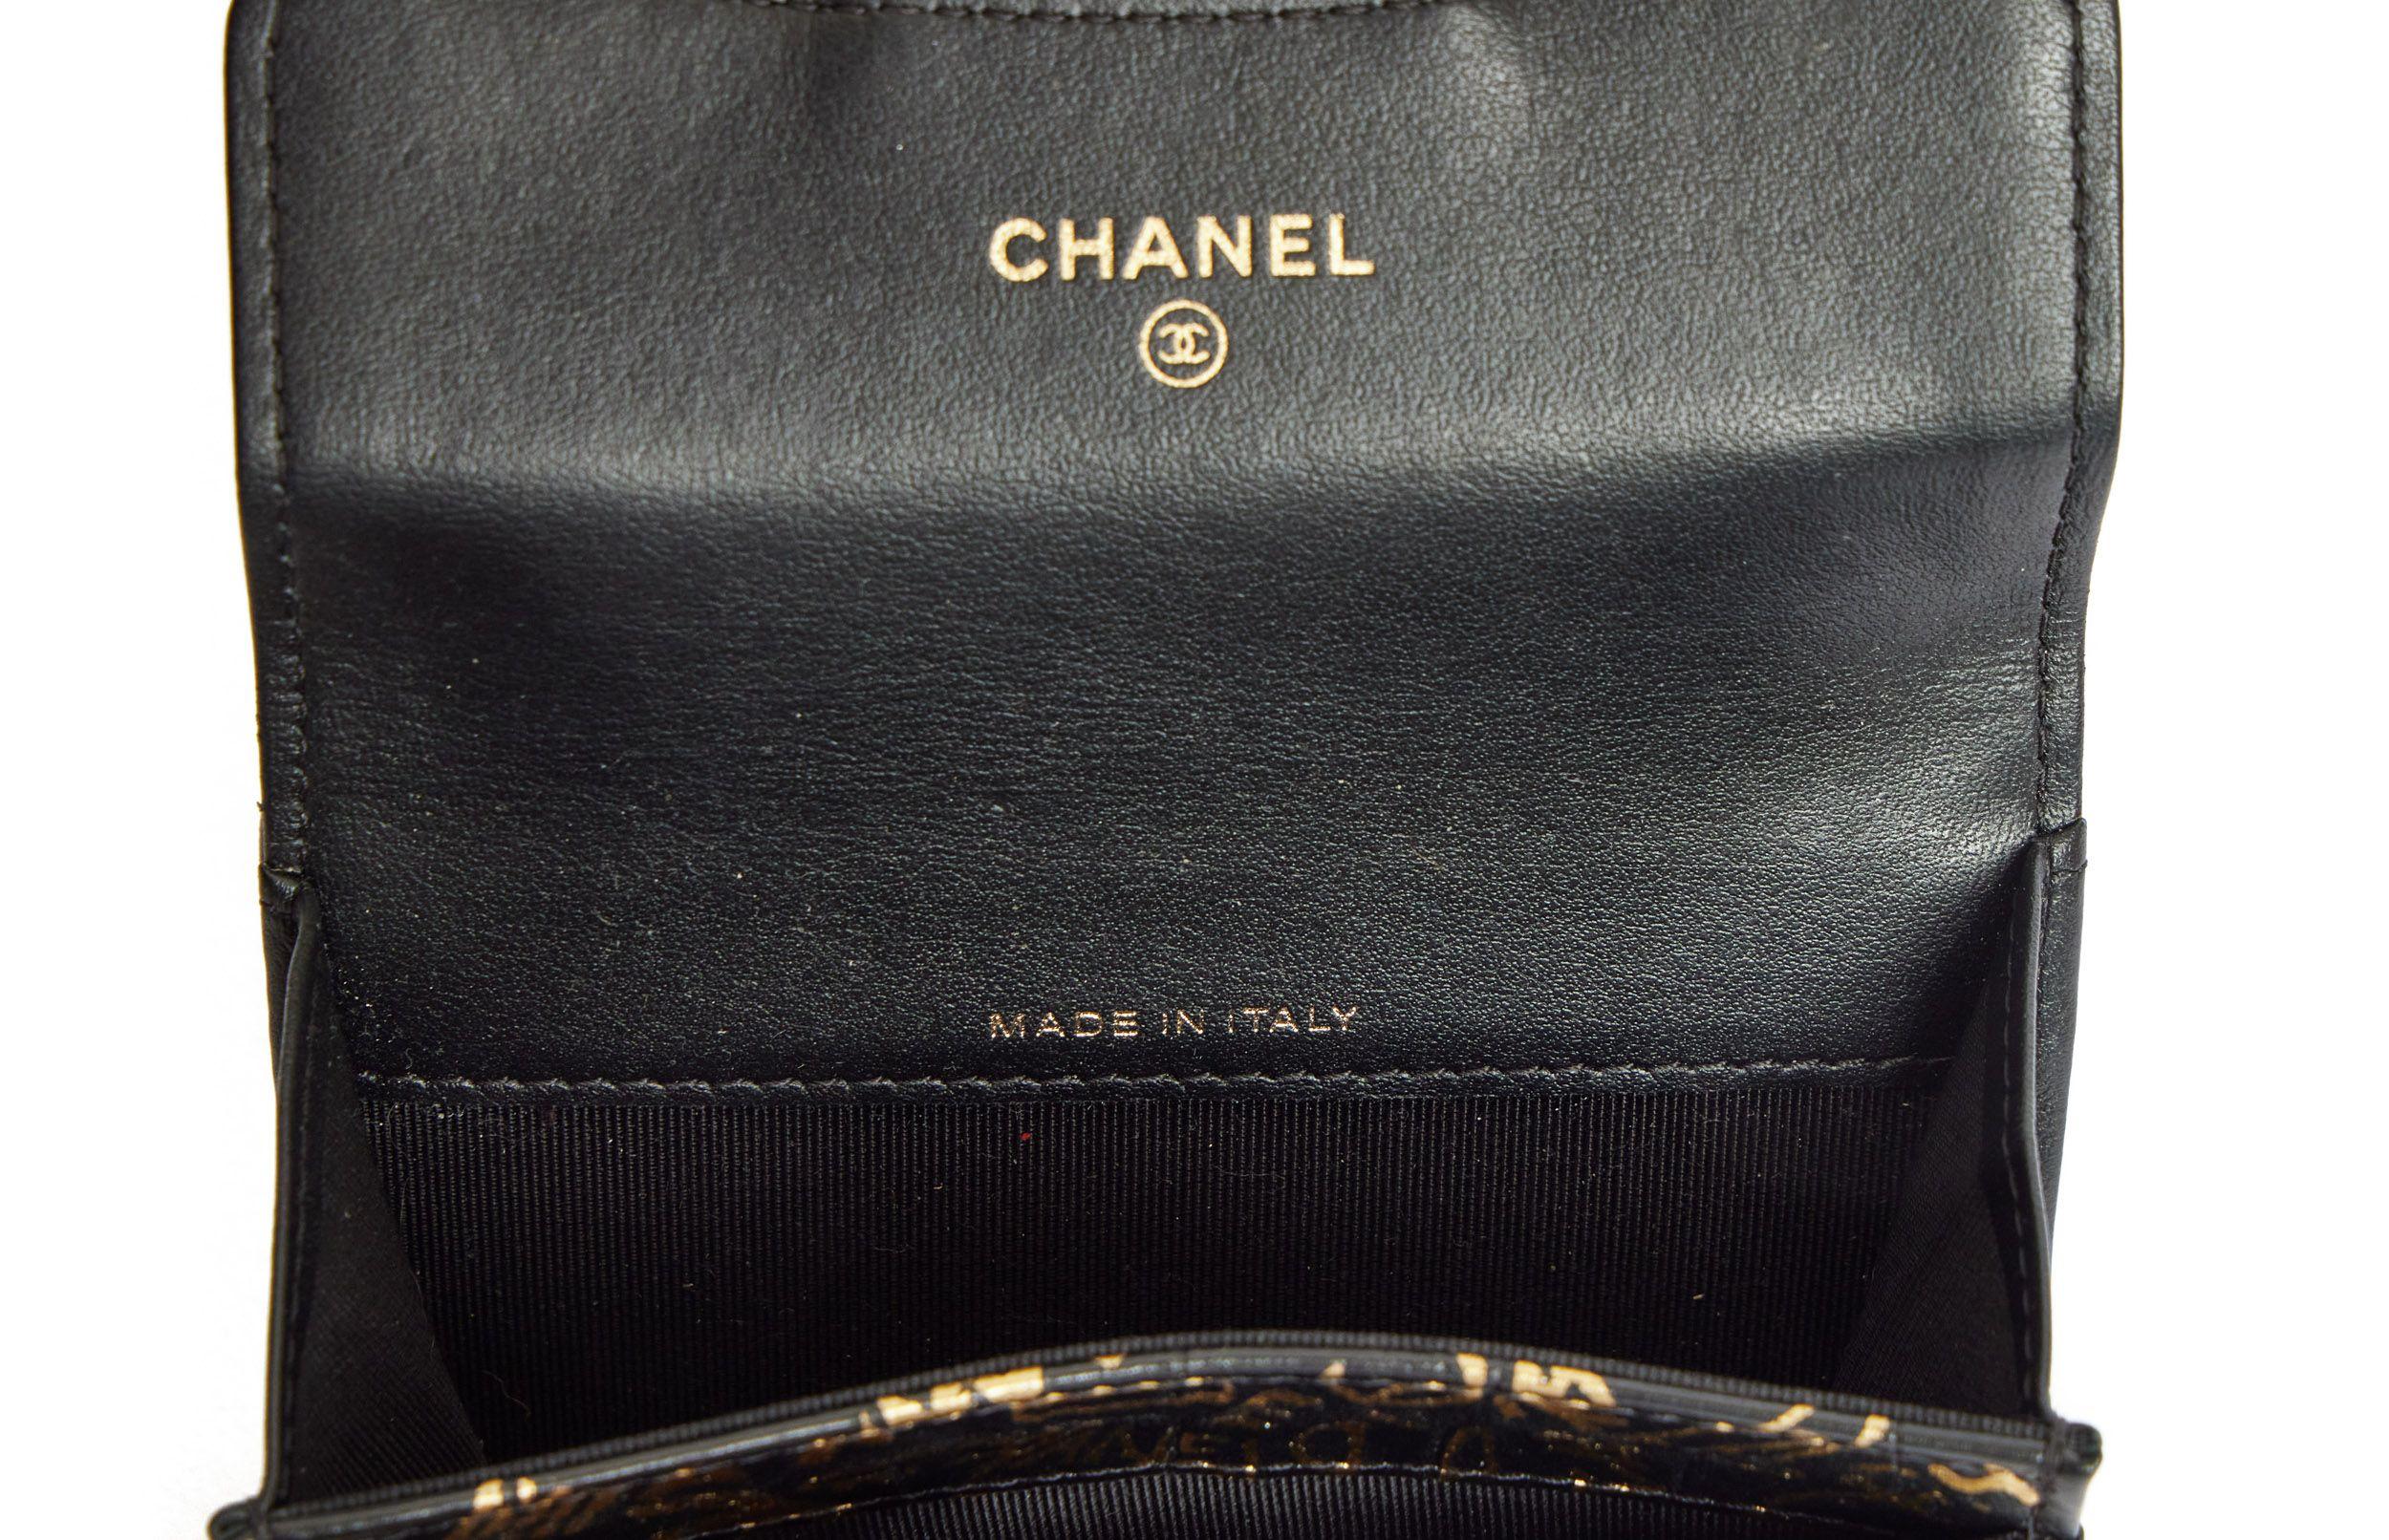 Chanel Credit Card Case Graffiti In Excellent Condition For Sale In West Hollywood, CA